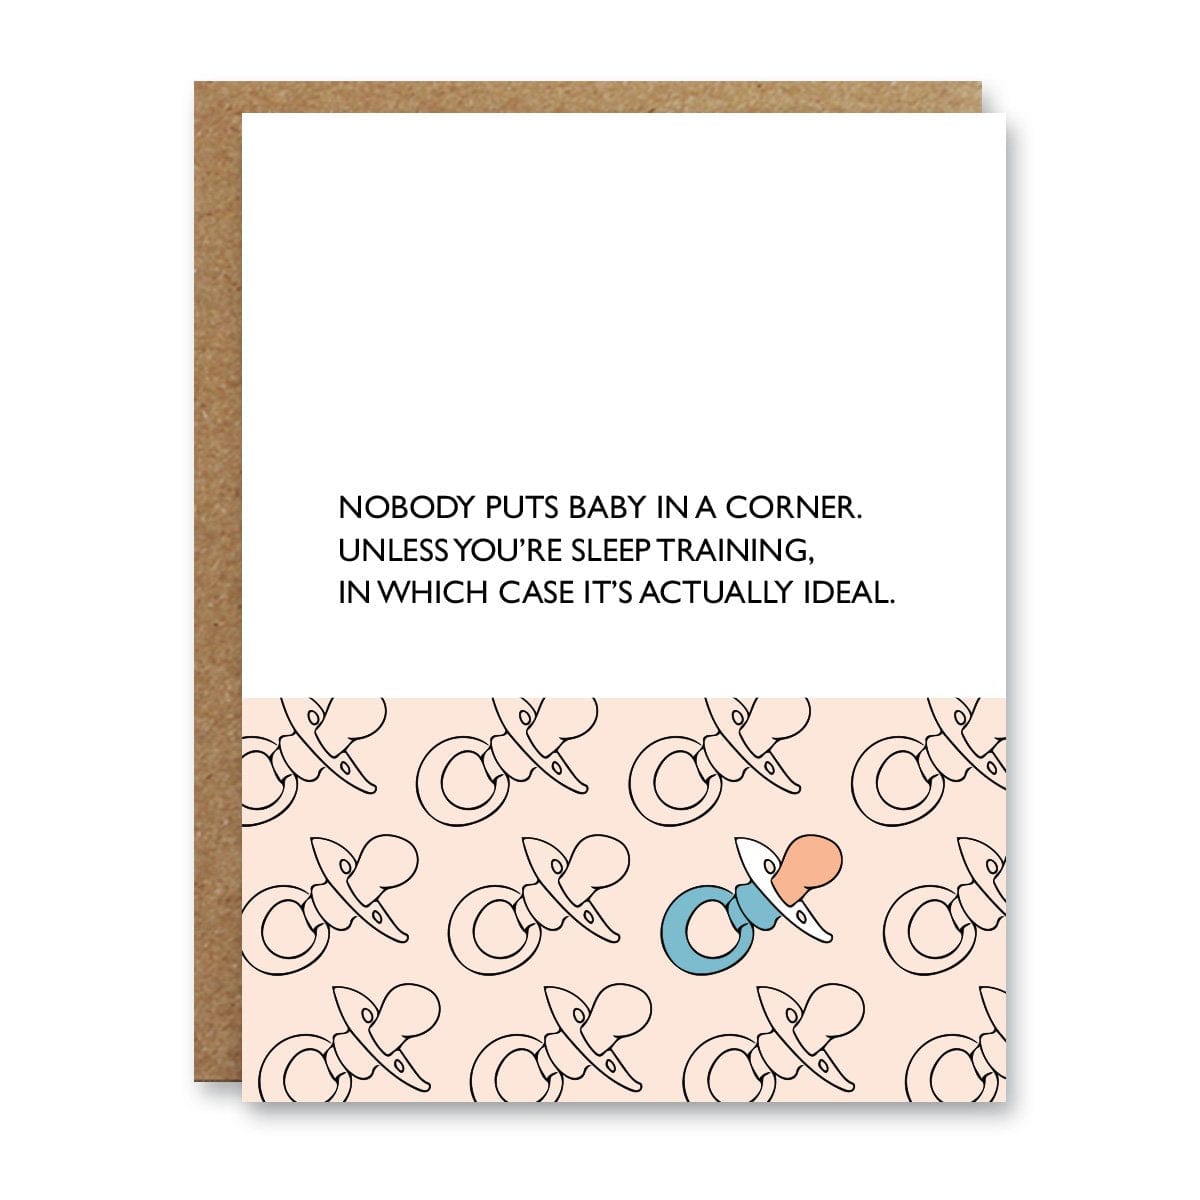 Boo To You Greeting Cards greeting card Boo To You 'Nobody Puts Baby In A Corner' Greeting Card